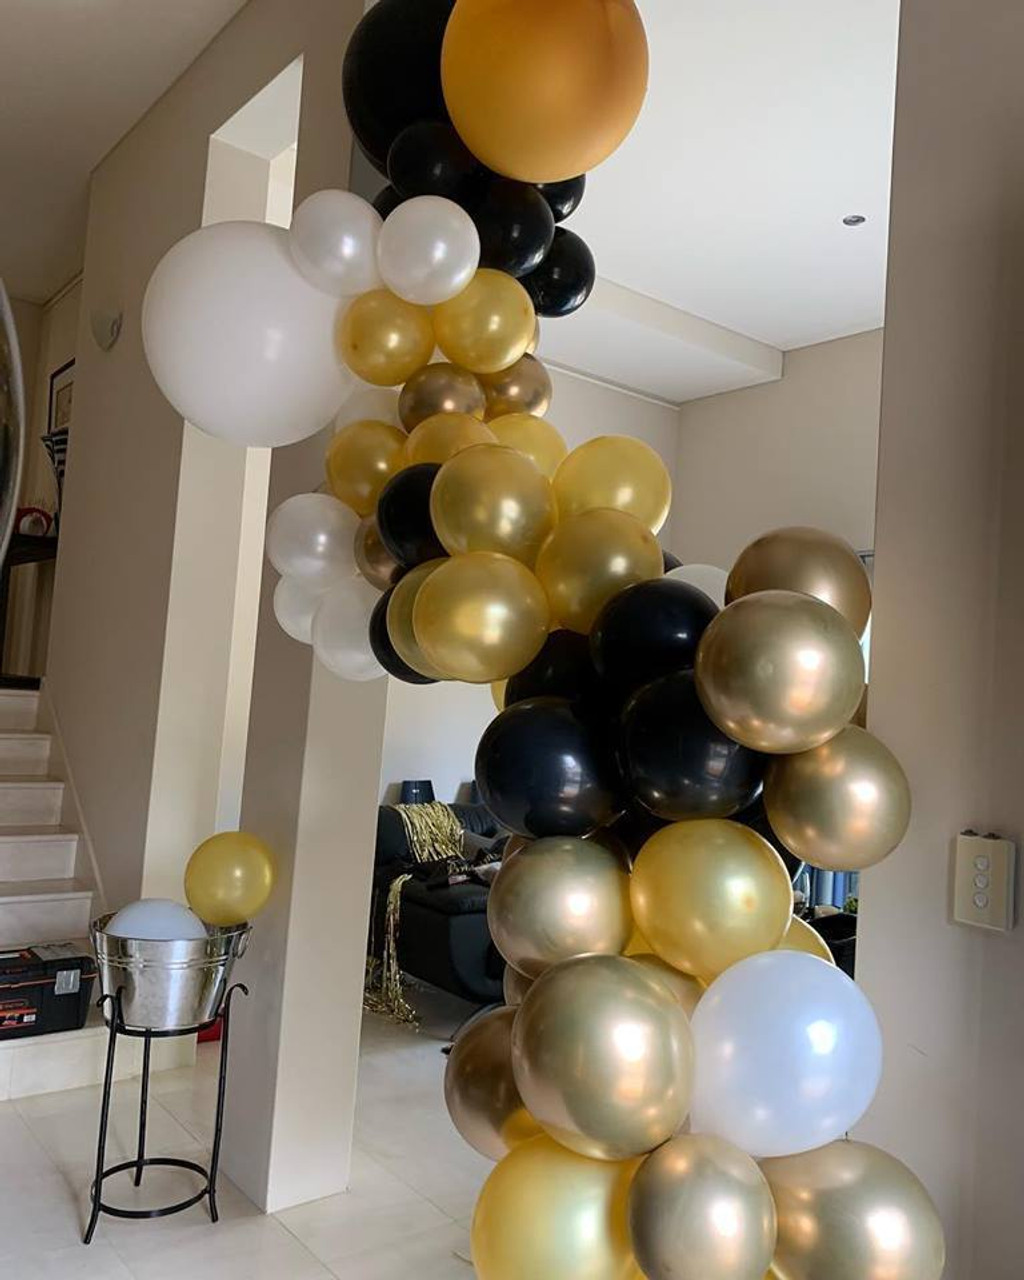 BALLOON GARLAND PREMIUM  - 3 METRE  (installation &delivery additional) Code- GARLANDPREM3

Includes your choice of latex with additional confetti balloons and/ or chrome finish latex